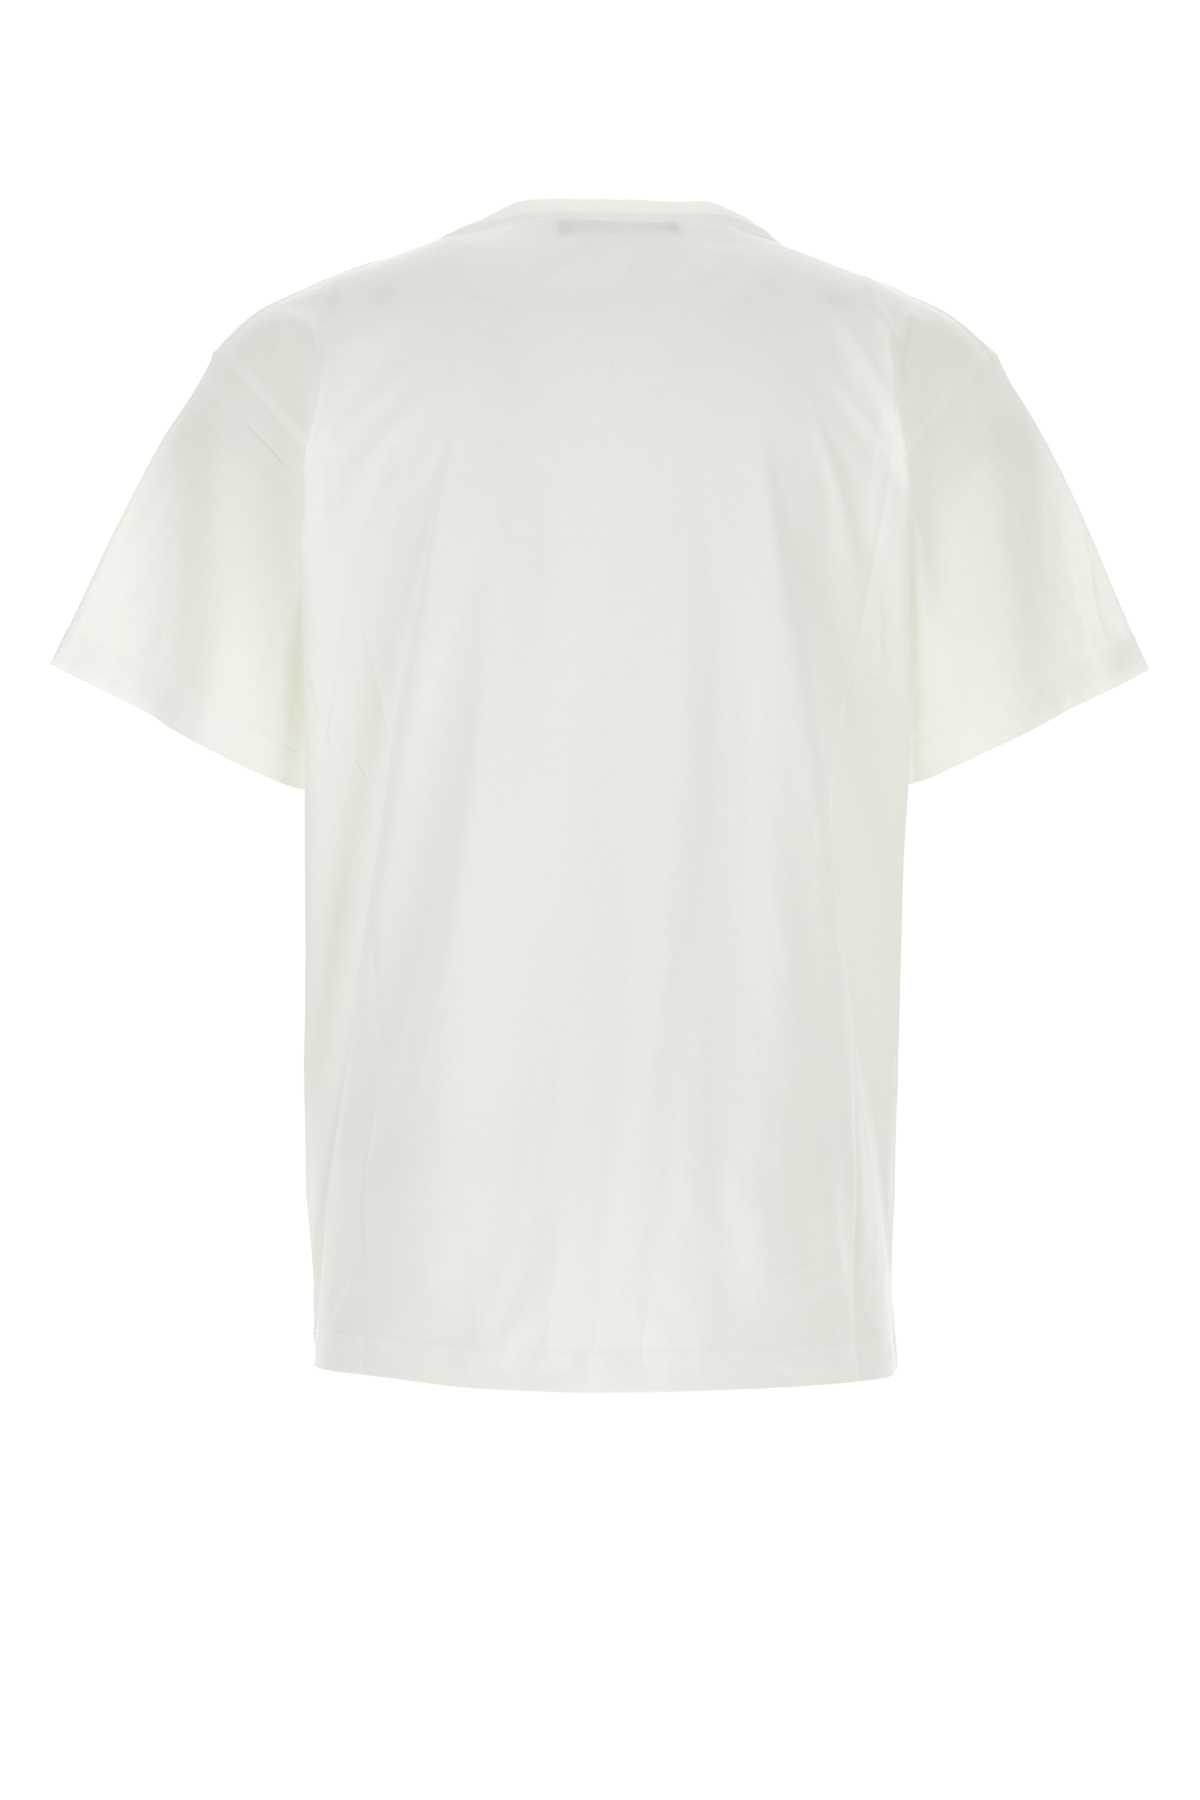 Y/project White Cotton T-shirt In Evergreen Optic White